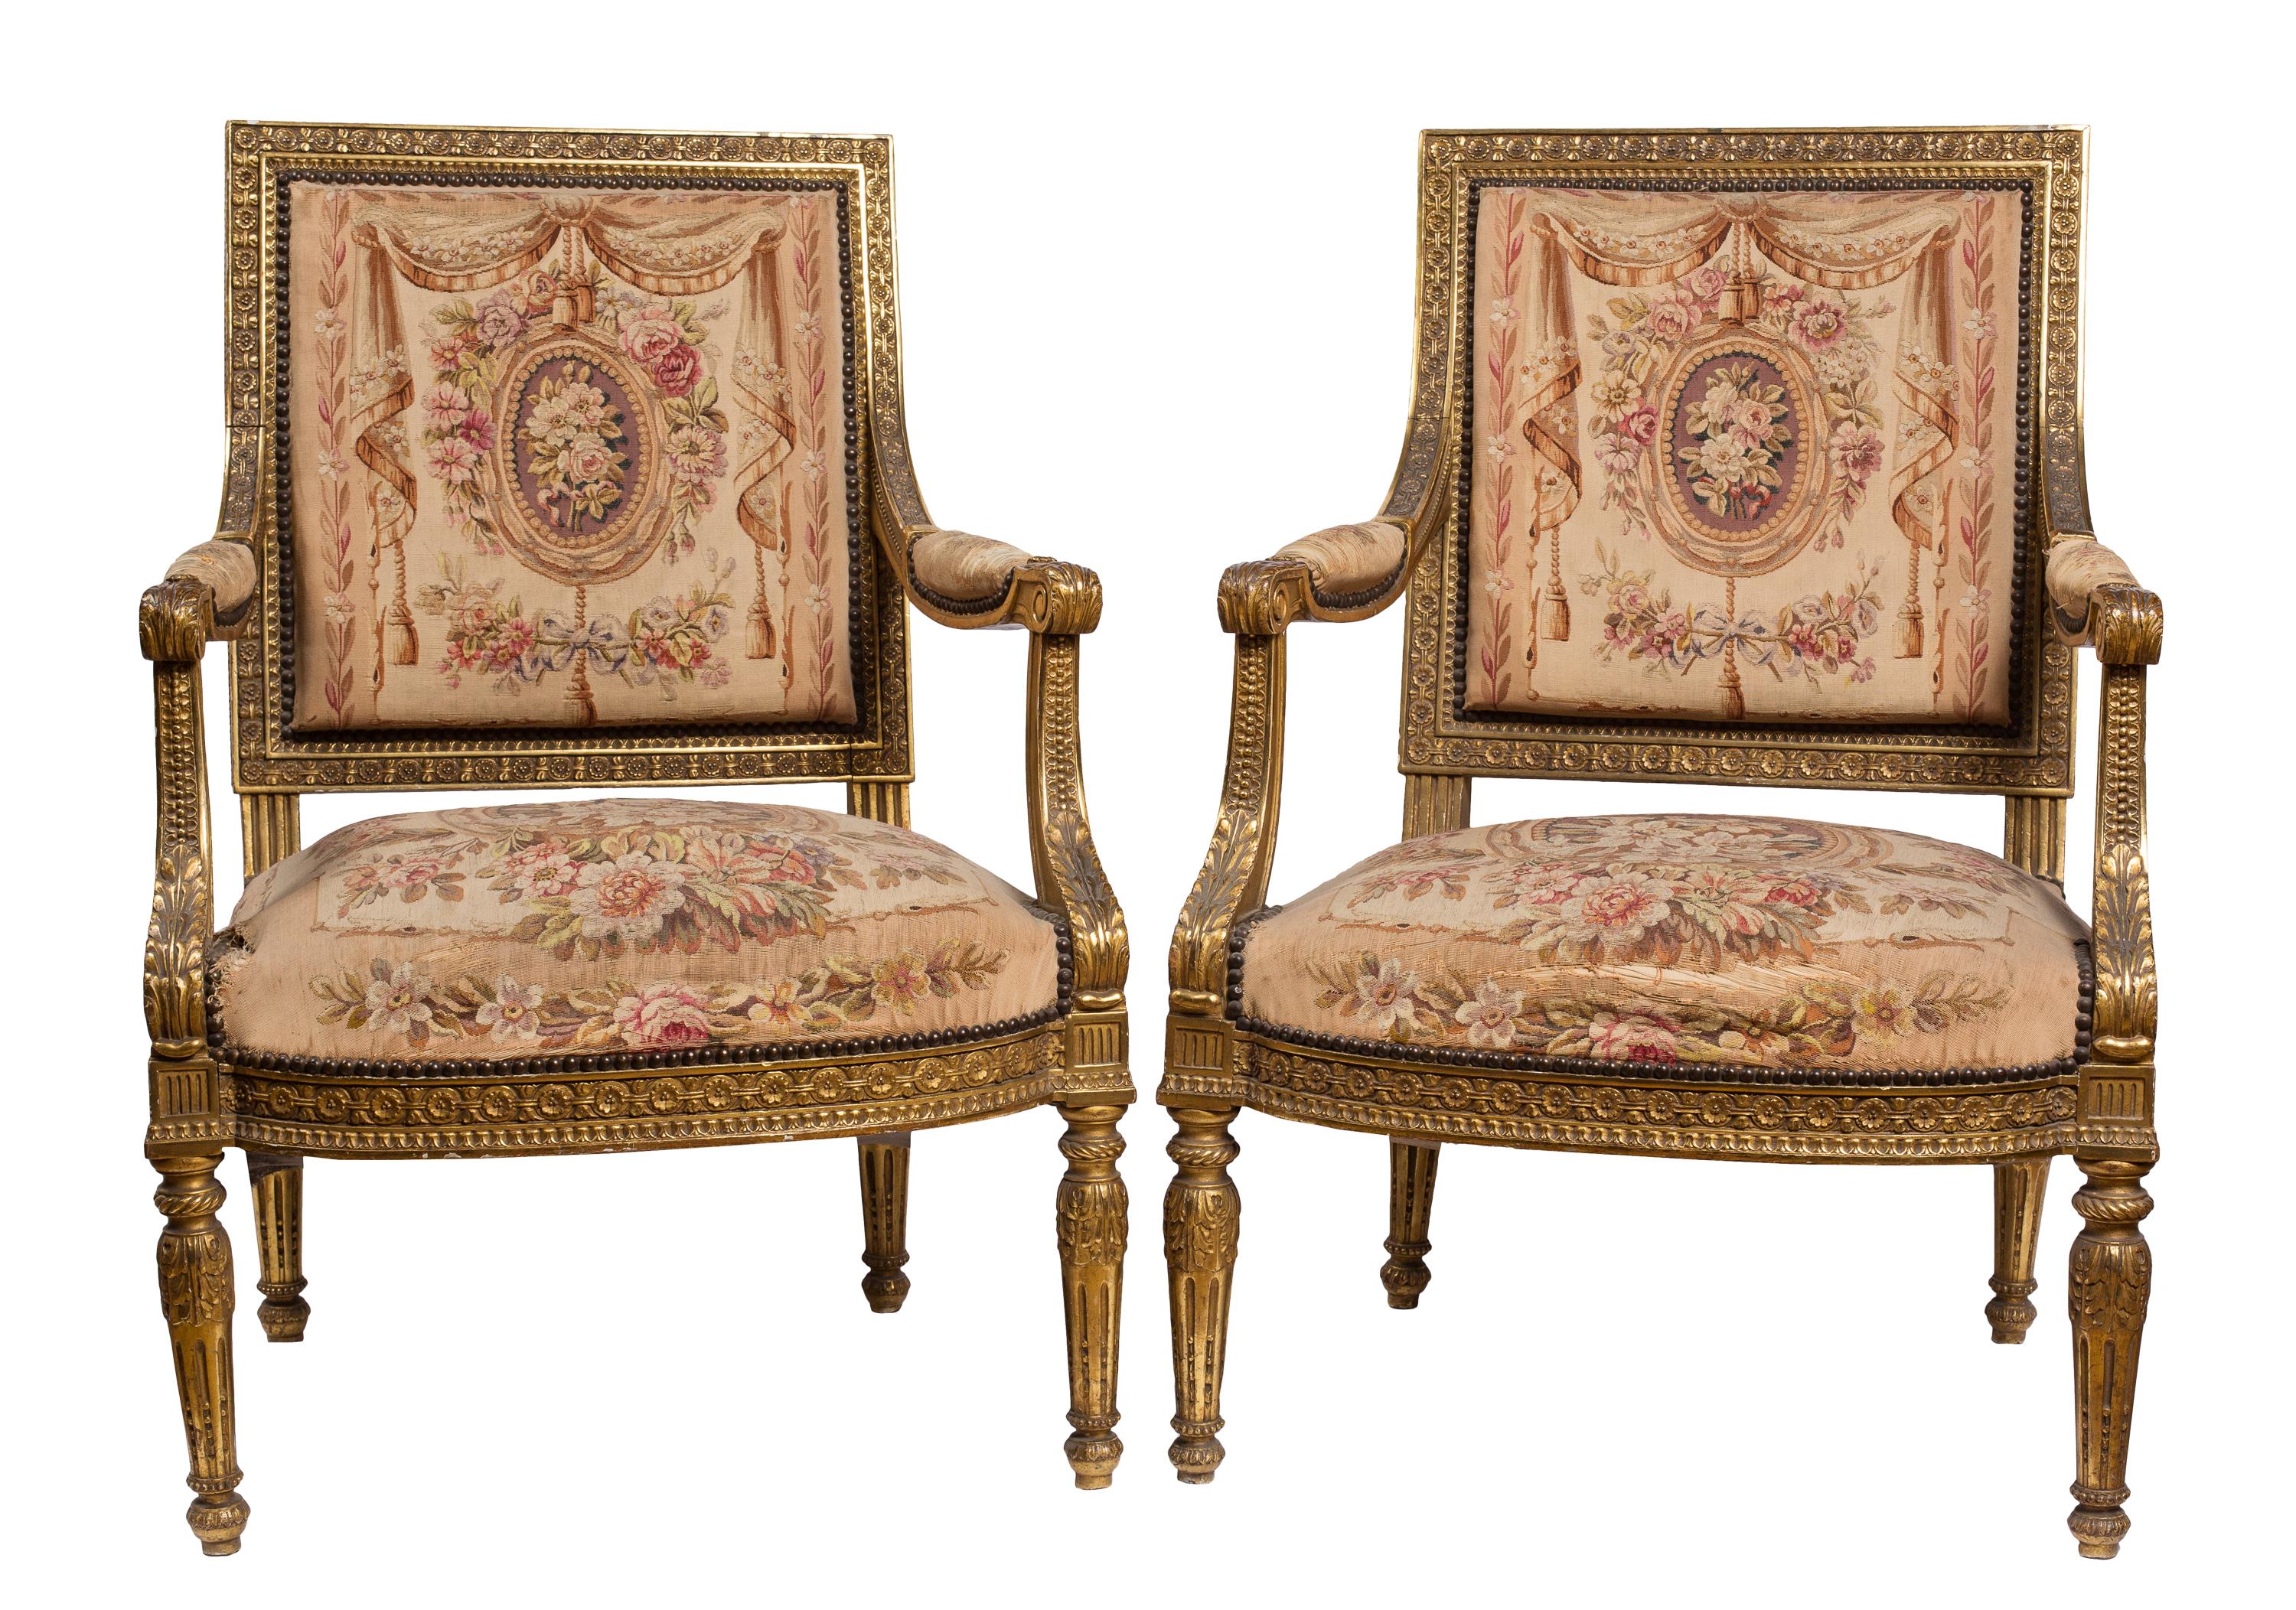 19th Century Antique Louis XVI Style Sofa, 4 Chair Salon Suite, Aubusson Tapestry Upholstery For Sale